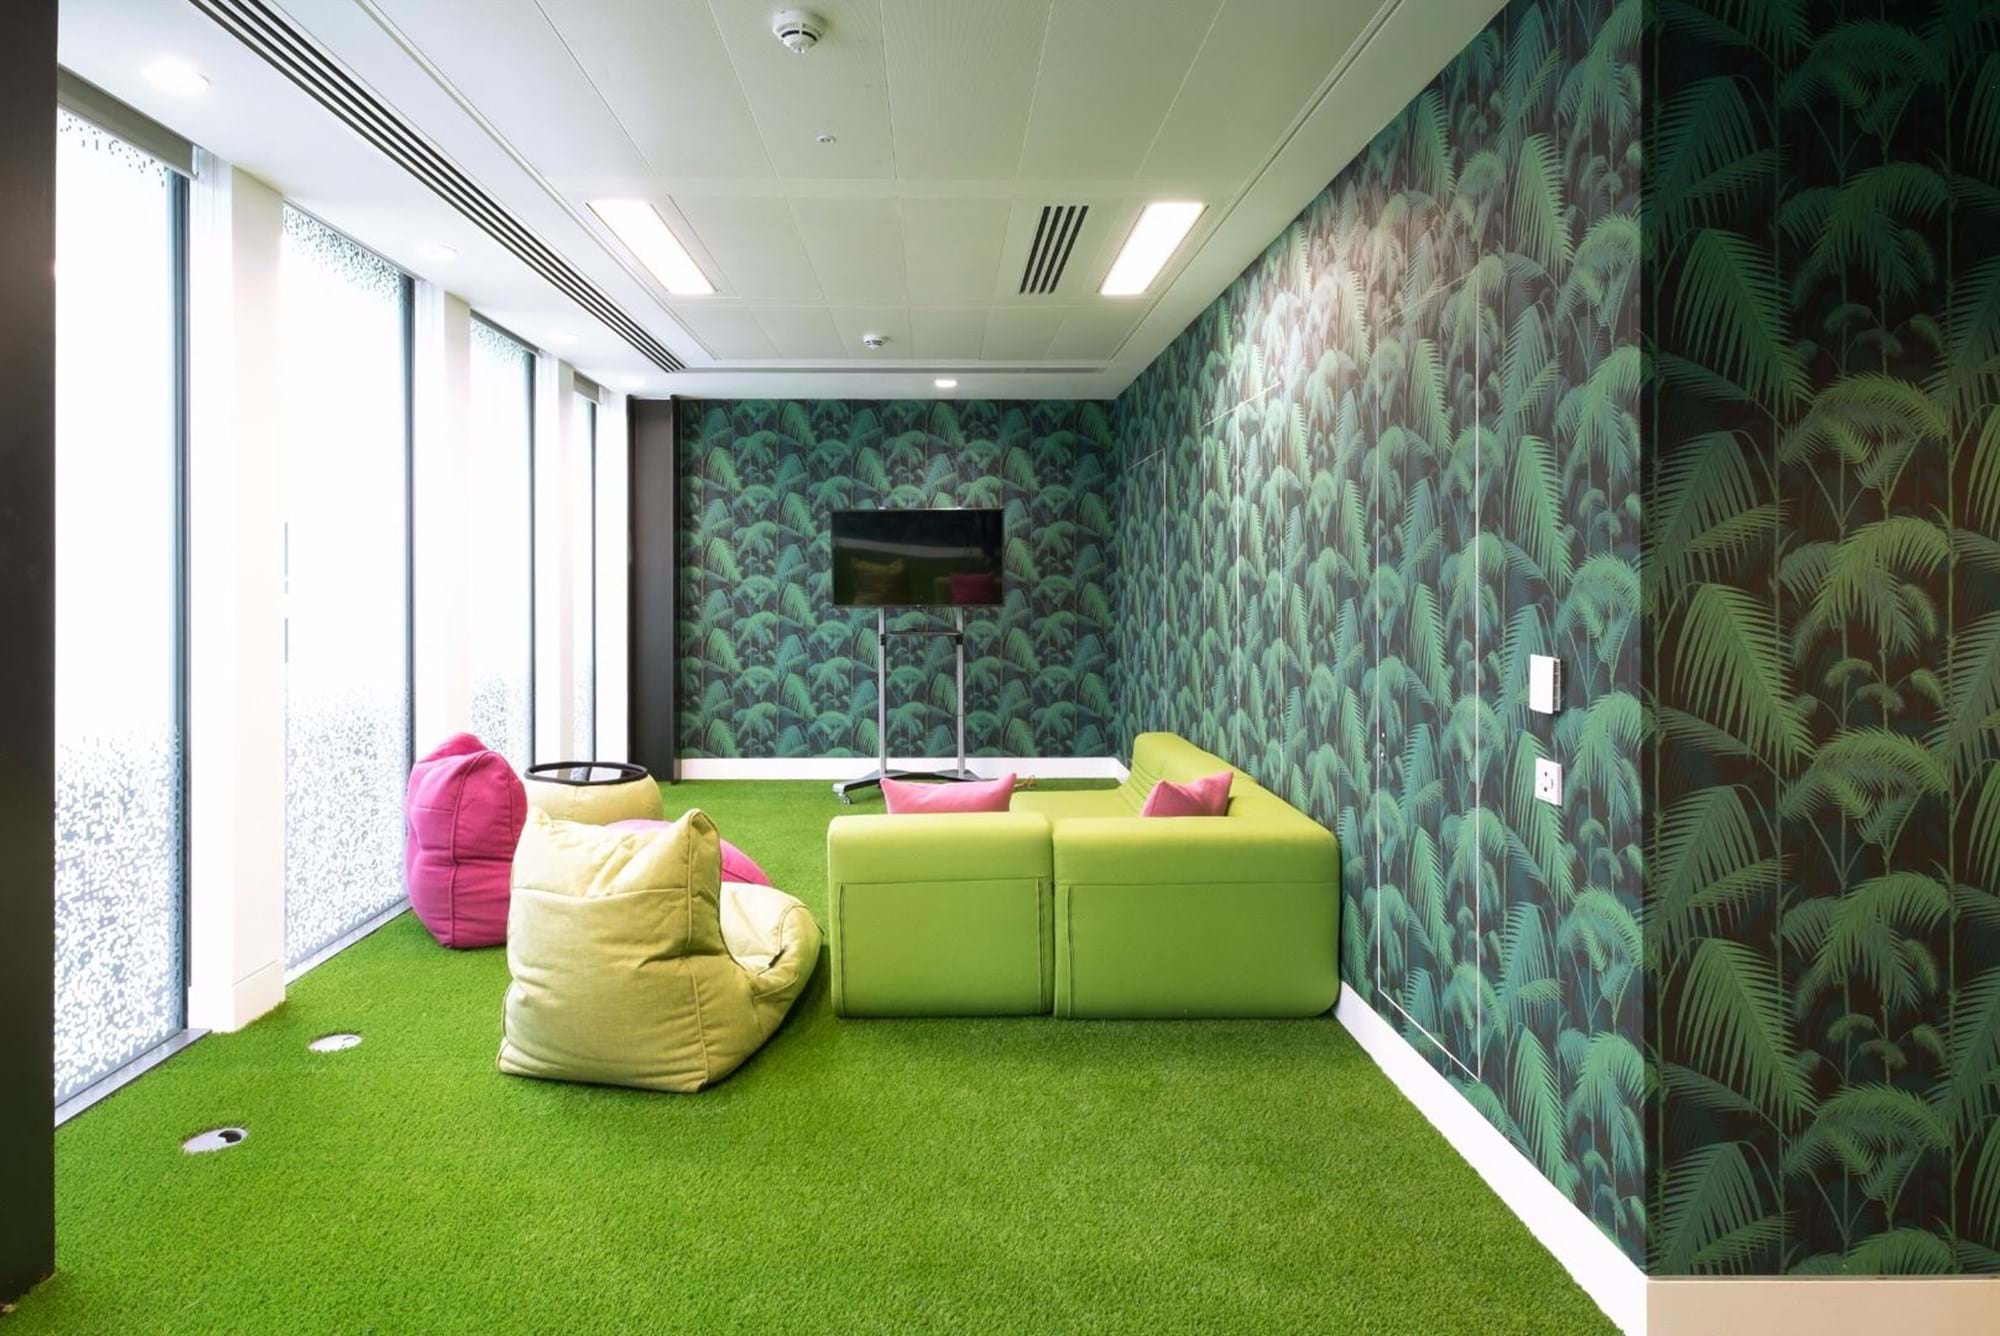 Modus Workspace office design, fit out and refurbishment - Skyscanner - Skyscanner-76.jpg